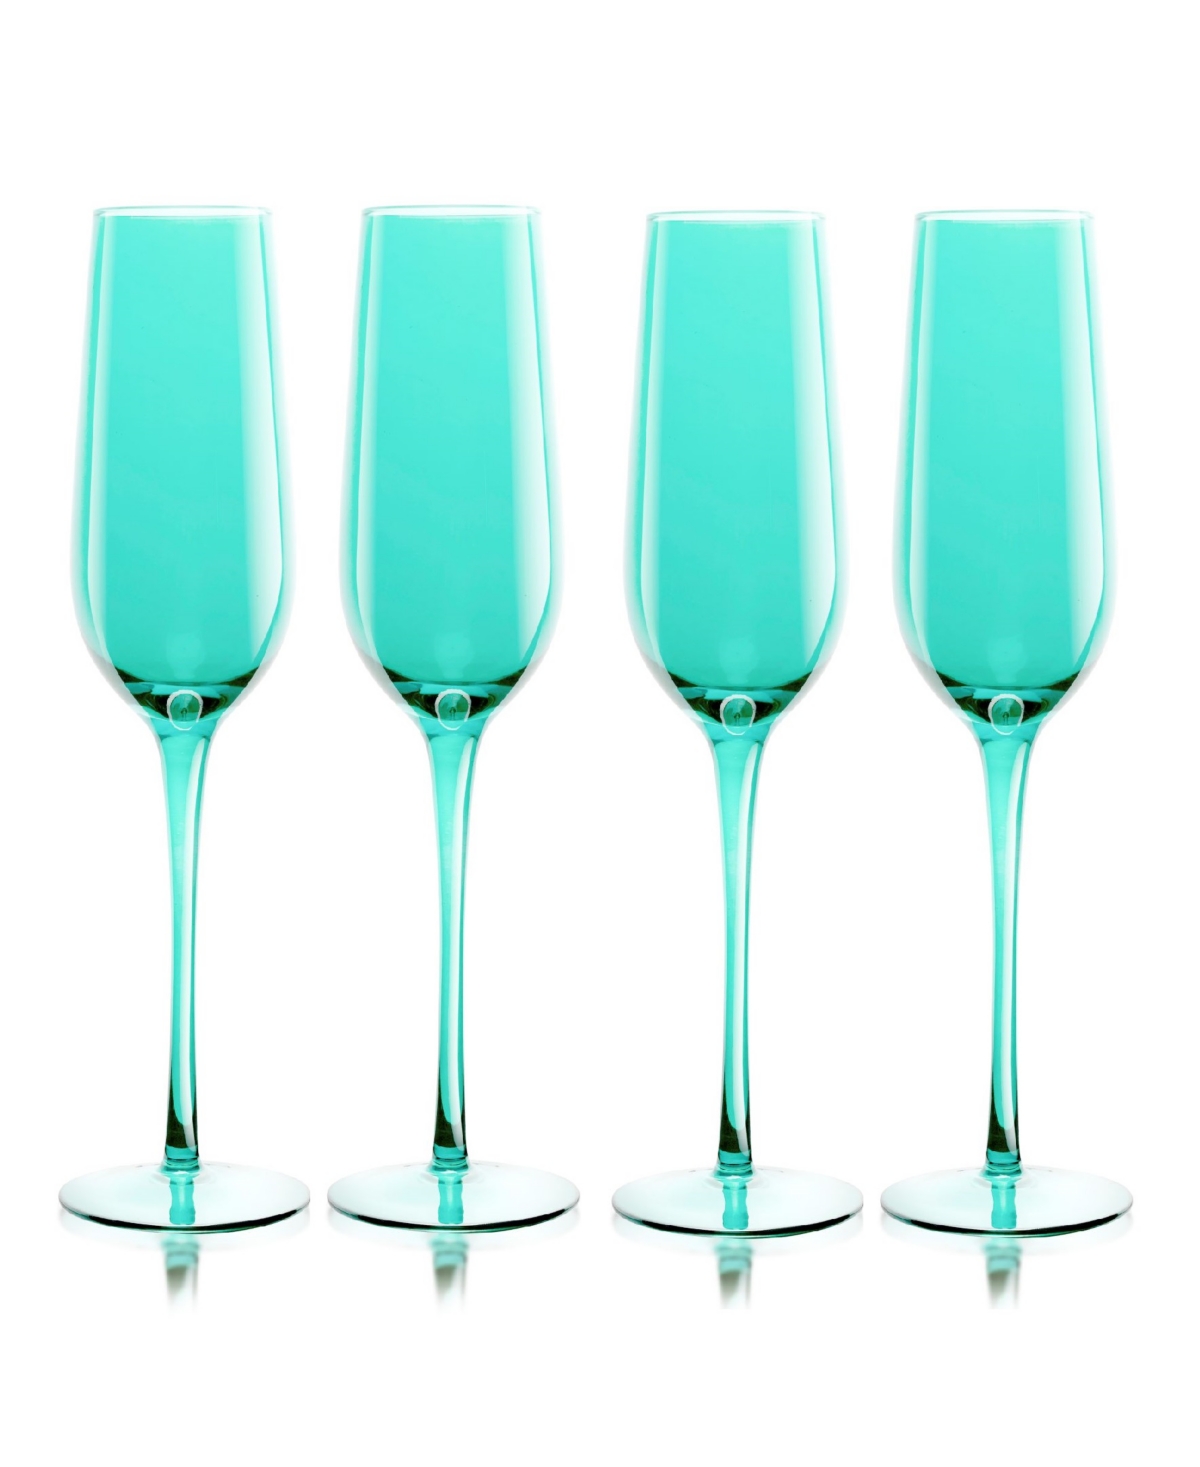 Qualia Glass Carnival Champagne Flutes, Set Of 4 In Turquoise